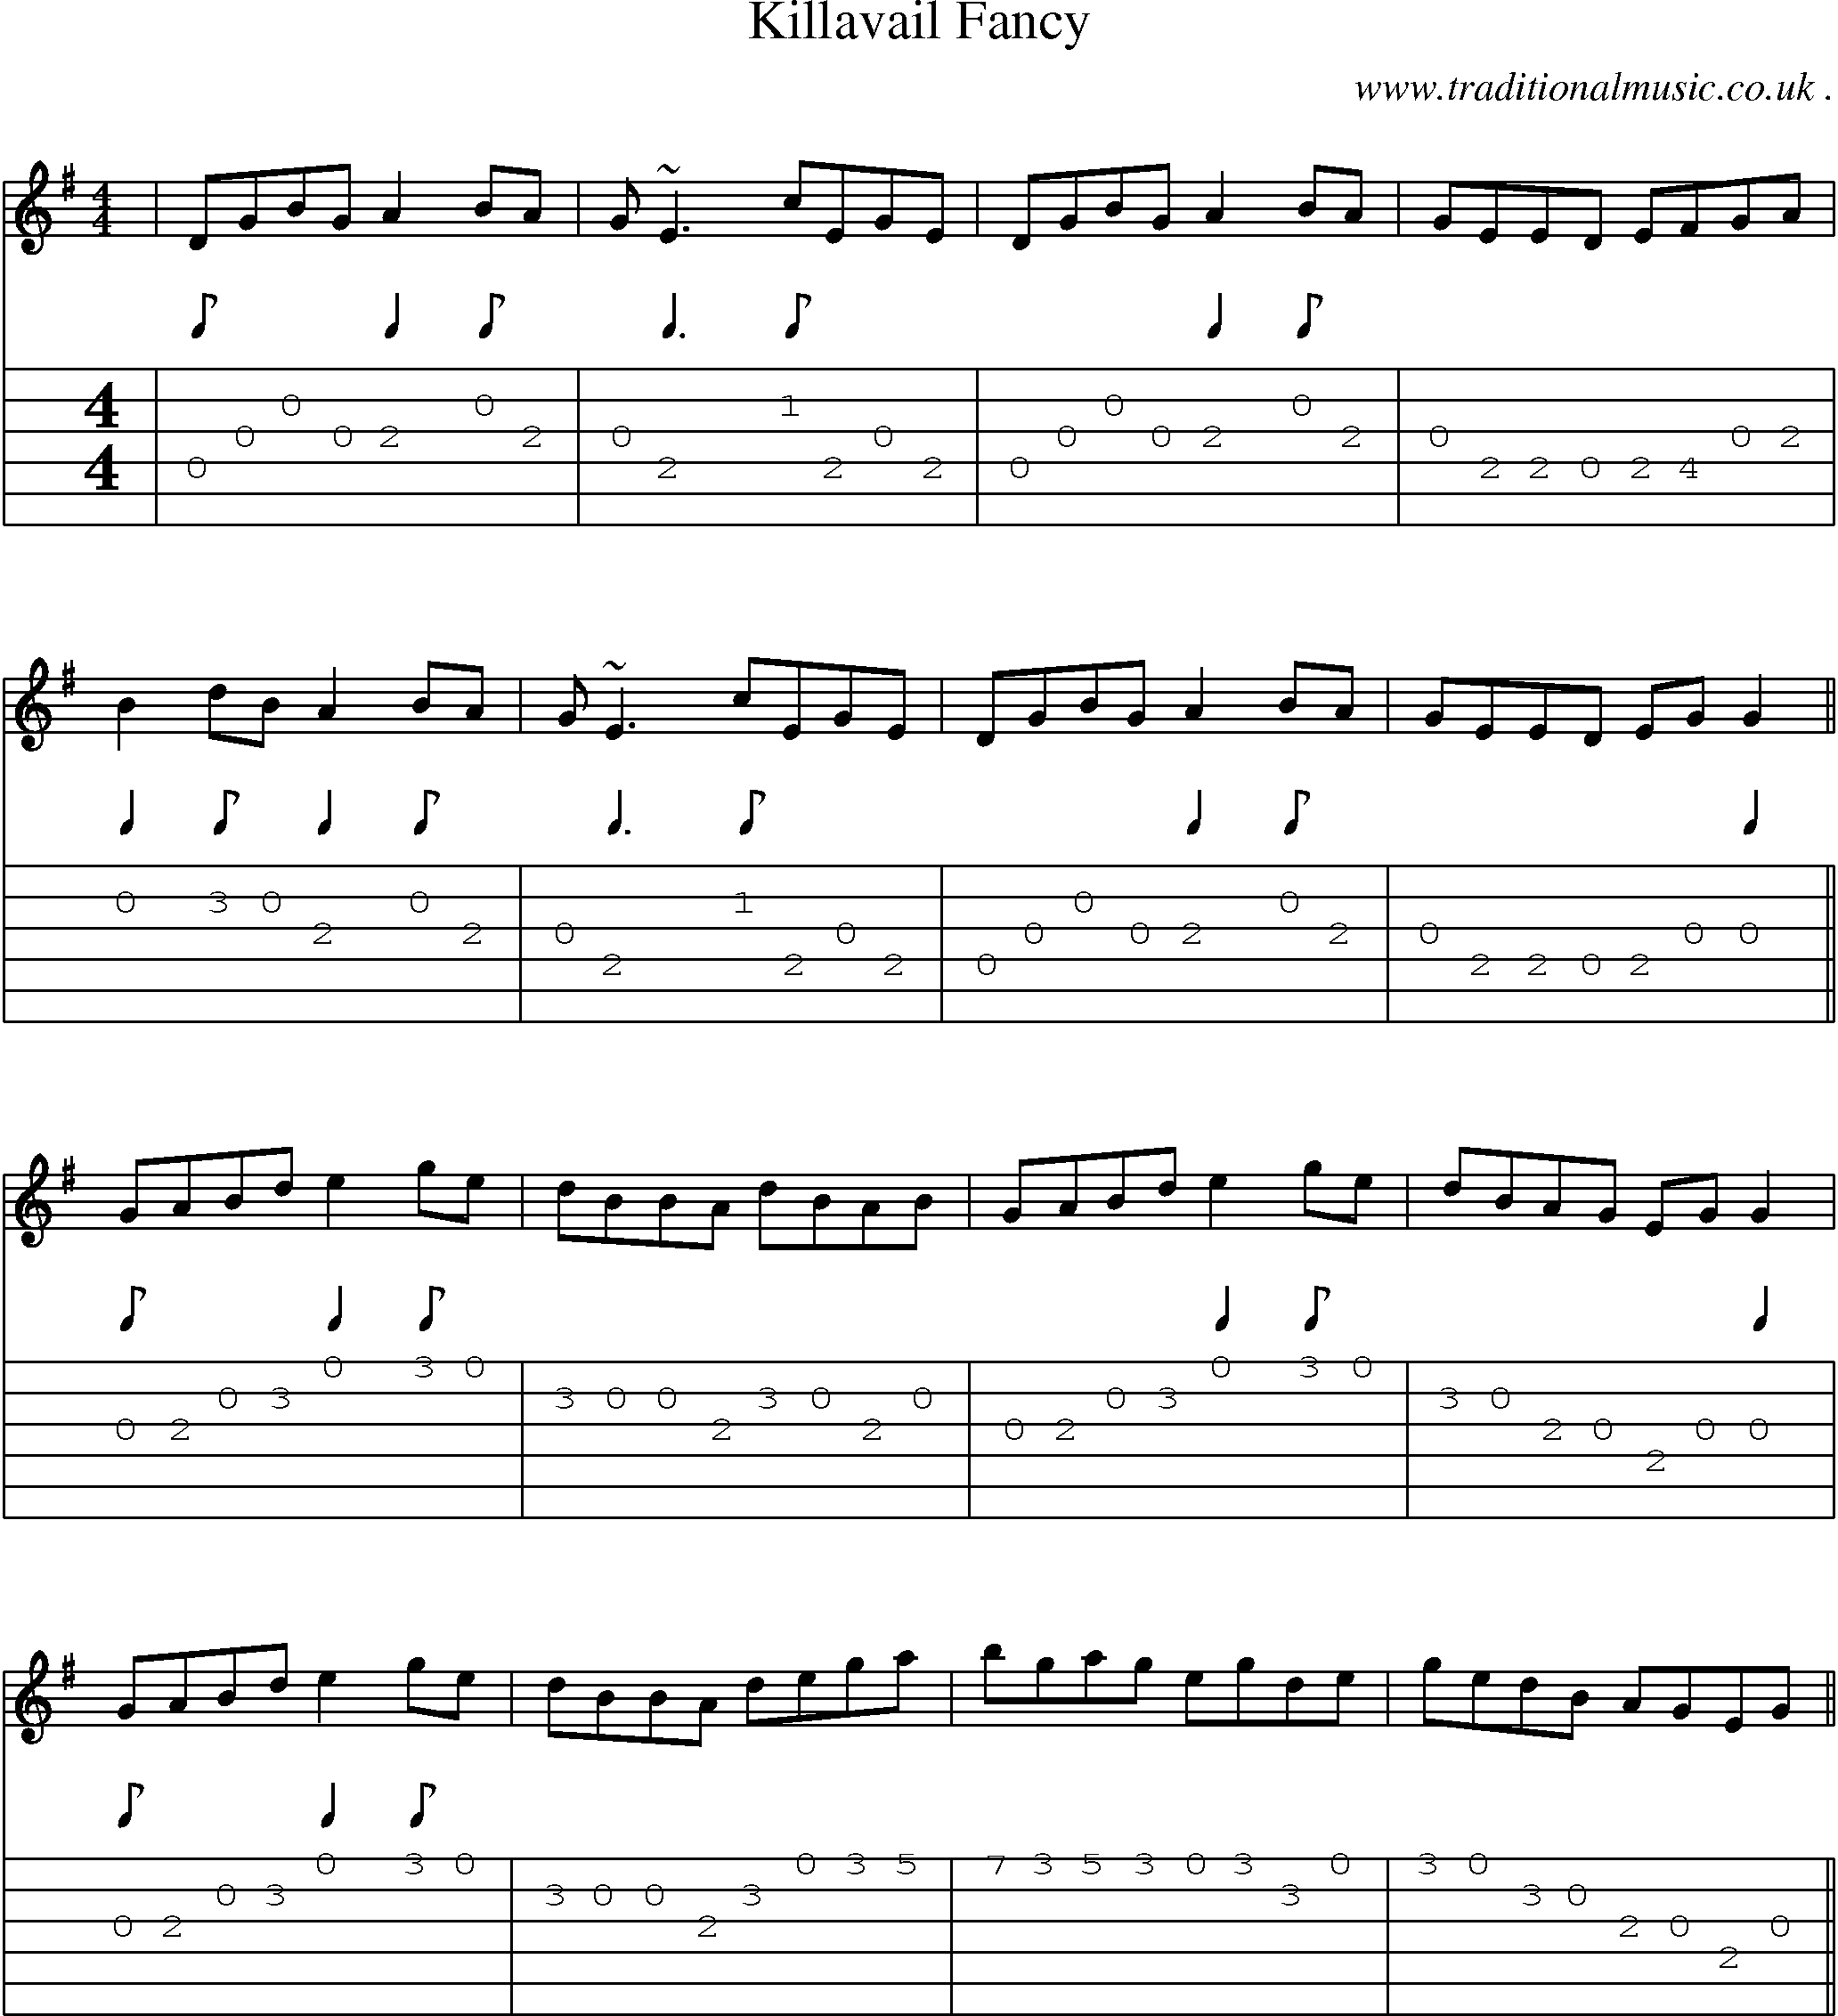 Music Score and Guitar Tabs for Killavail Fancy